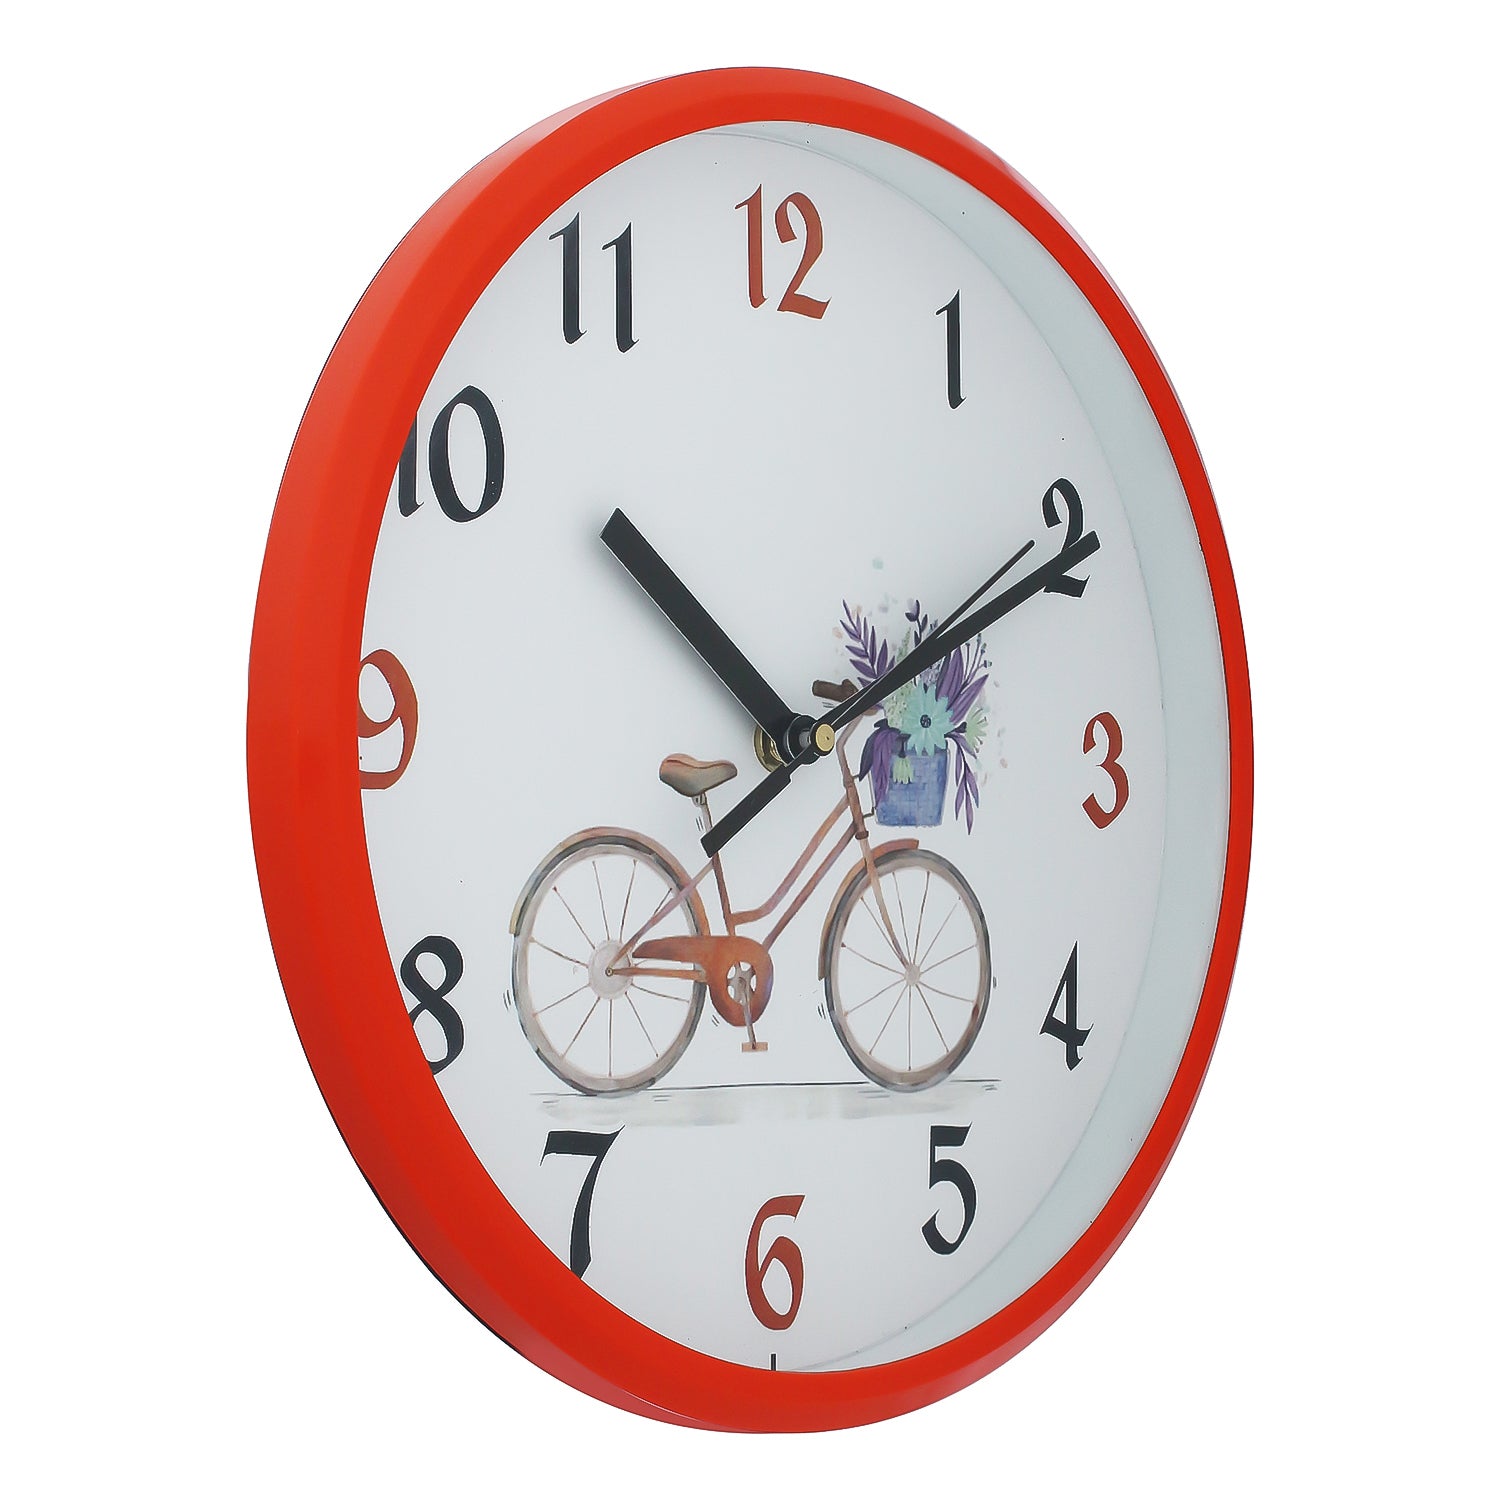 White Dial Printed Round Plastic Orange Wall Clock for Kids (10*10 IN) 4